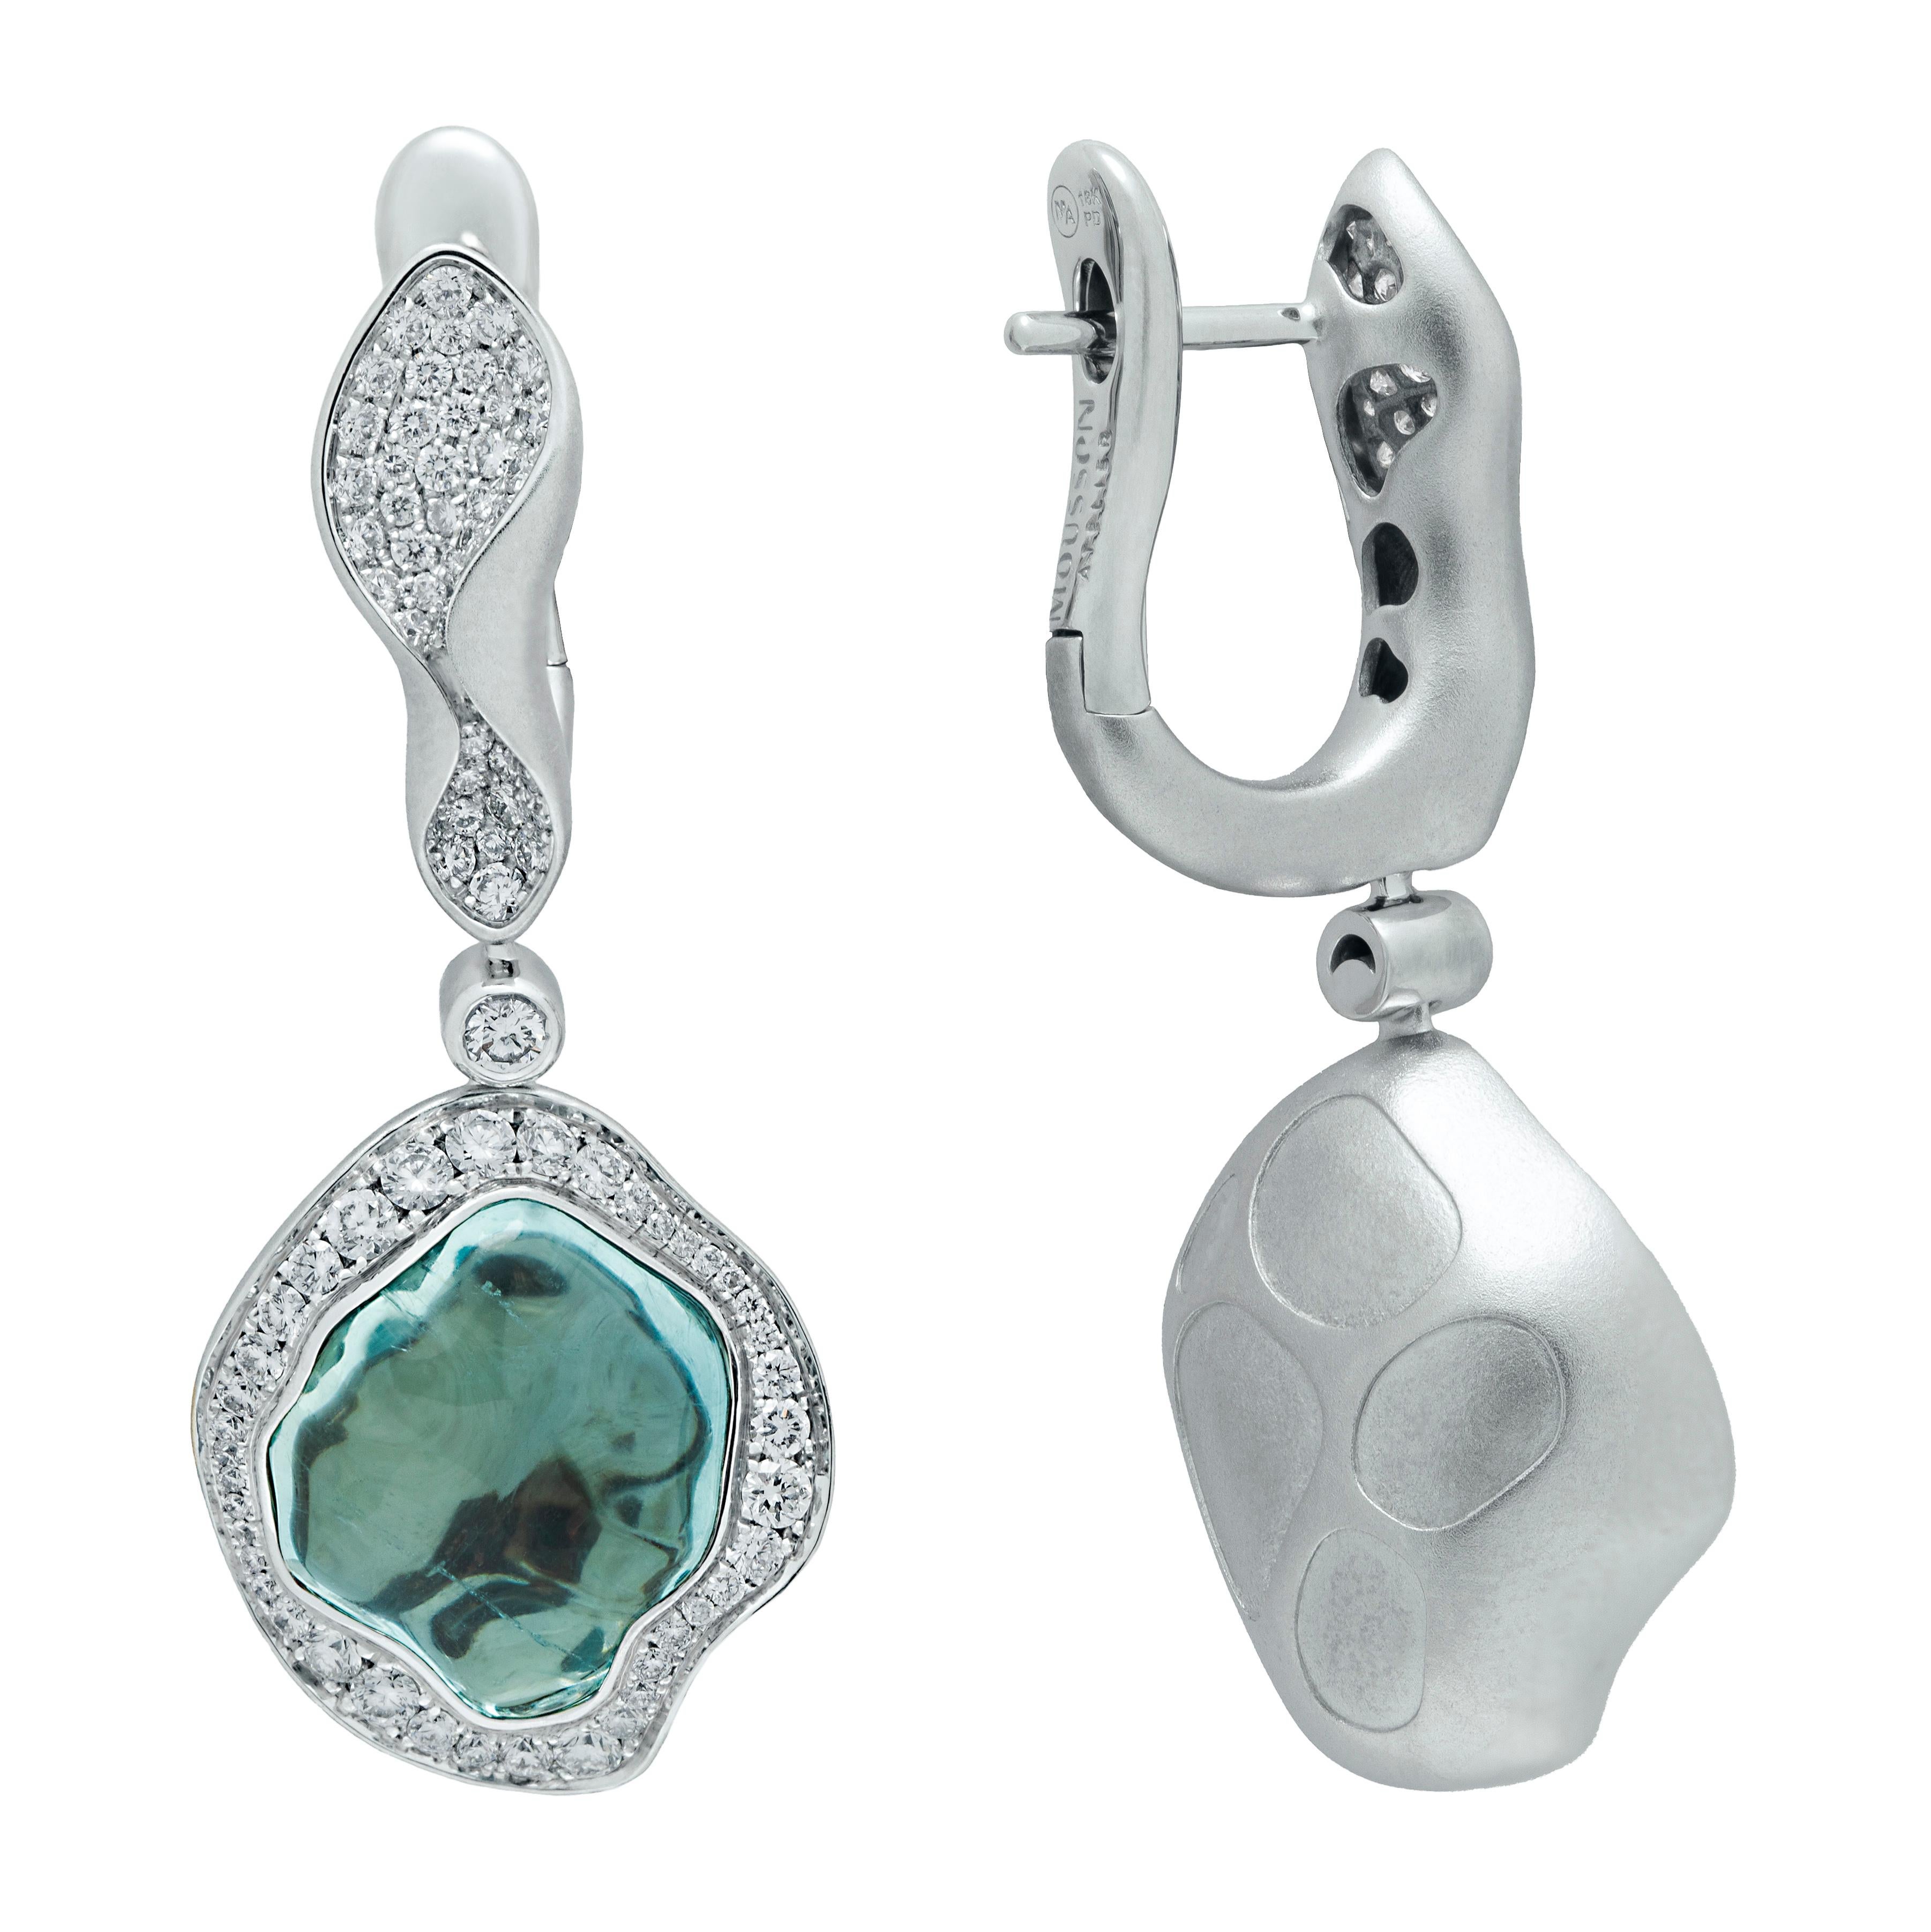 Aquamarine Baroque 14.40 Carat Diamonds 18 Karat White Gold Spectrum Earrings

Gorgeous and unique, this 18K White Gold, Aquamarines, Diamonds Earrings from the Spectrum collection is a show-stopper. Spectacular baroque-shaped Aquamarines framed